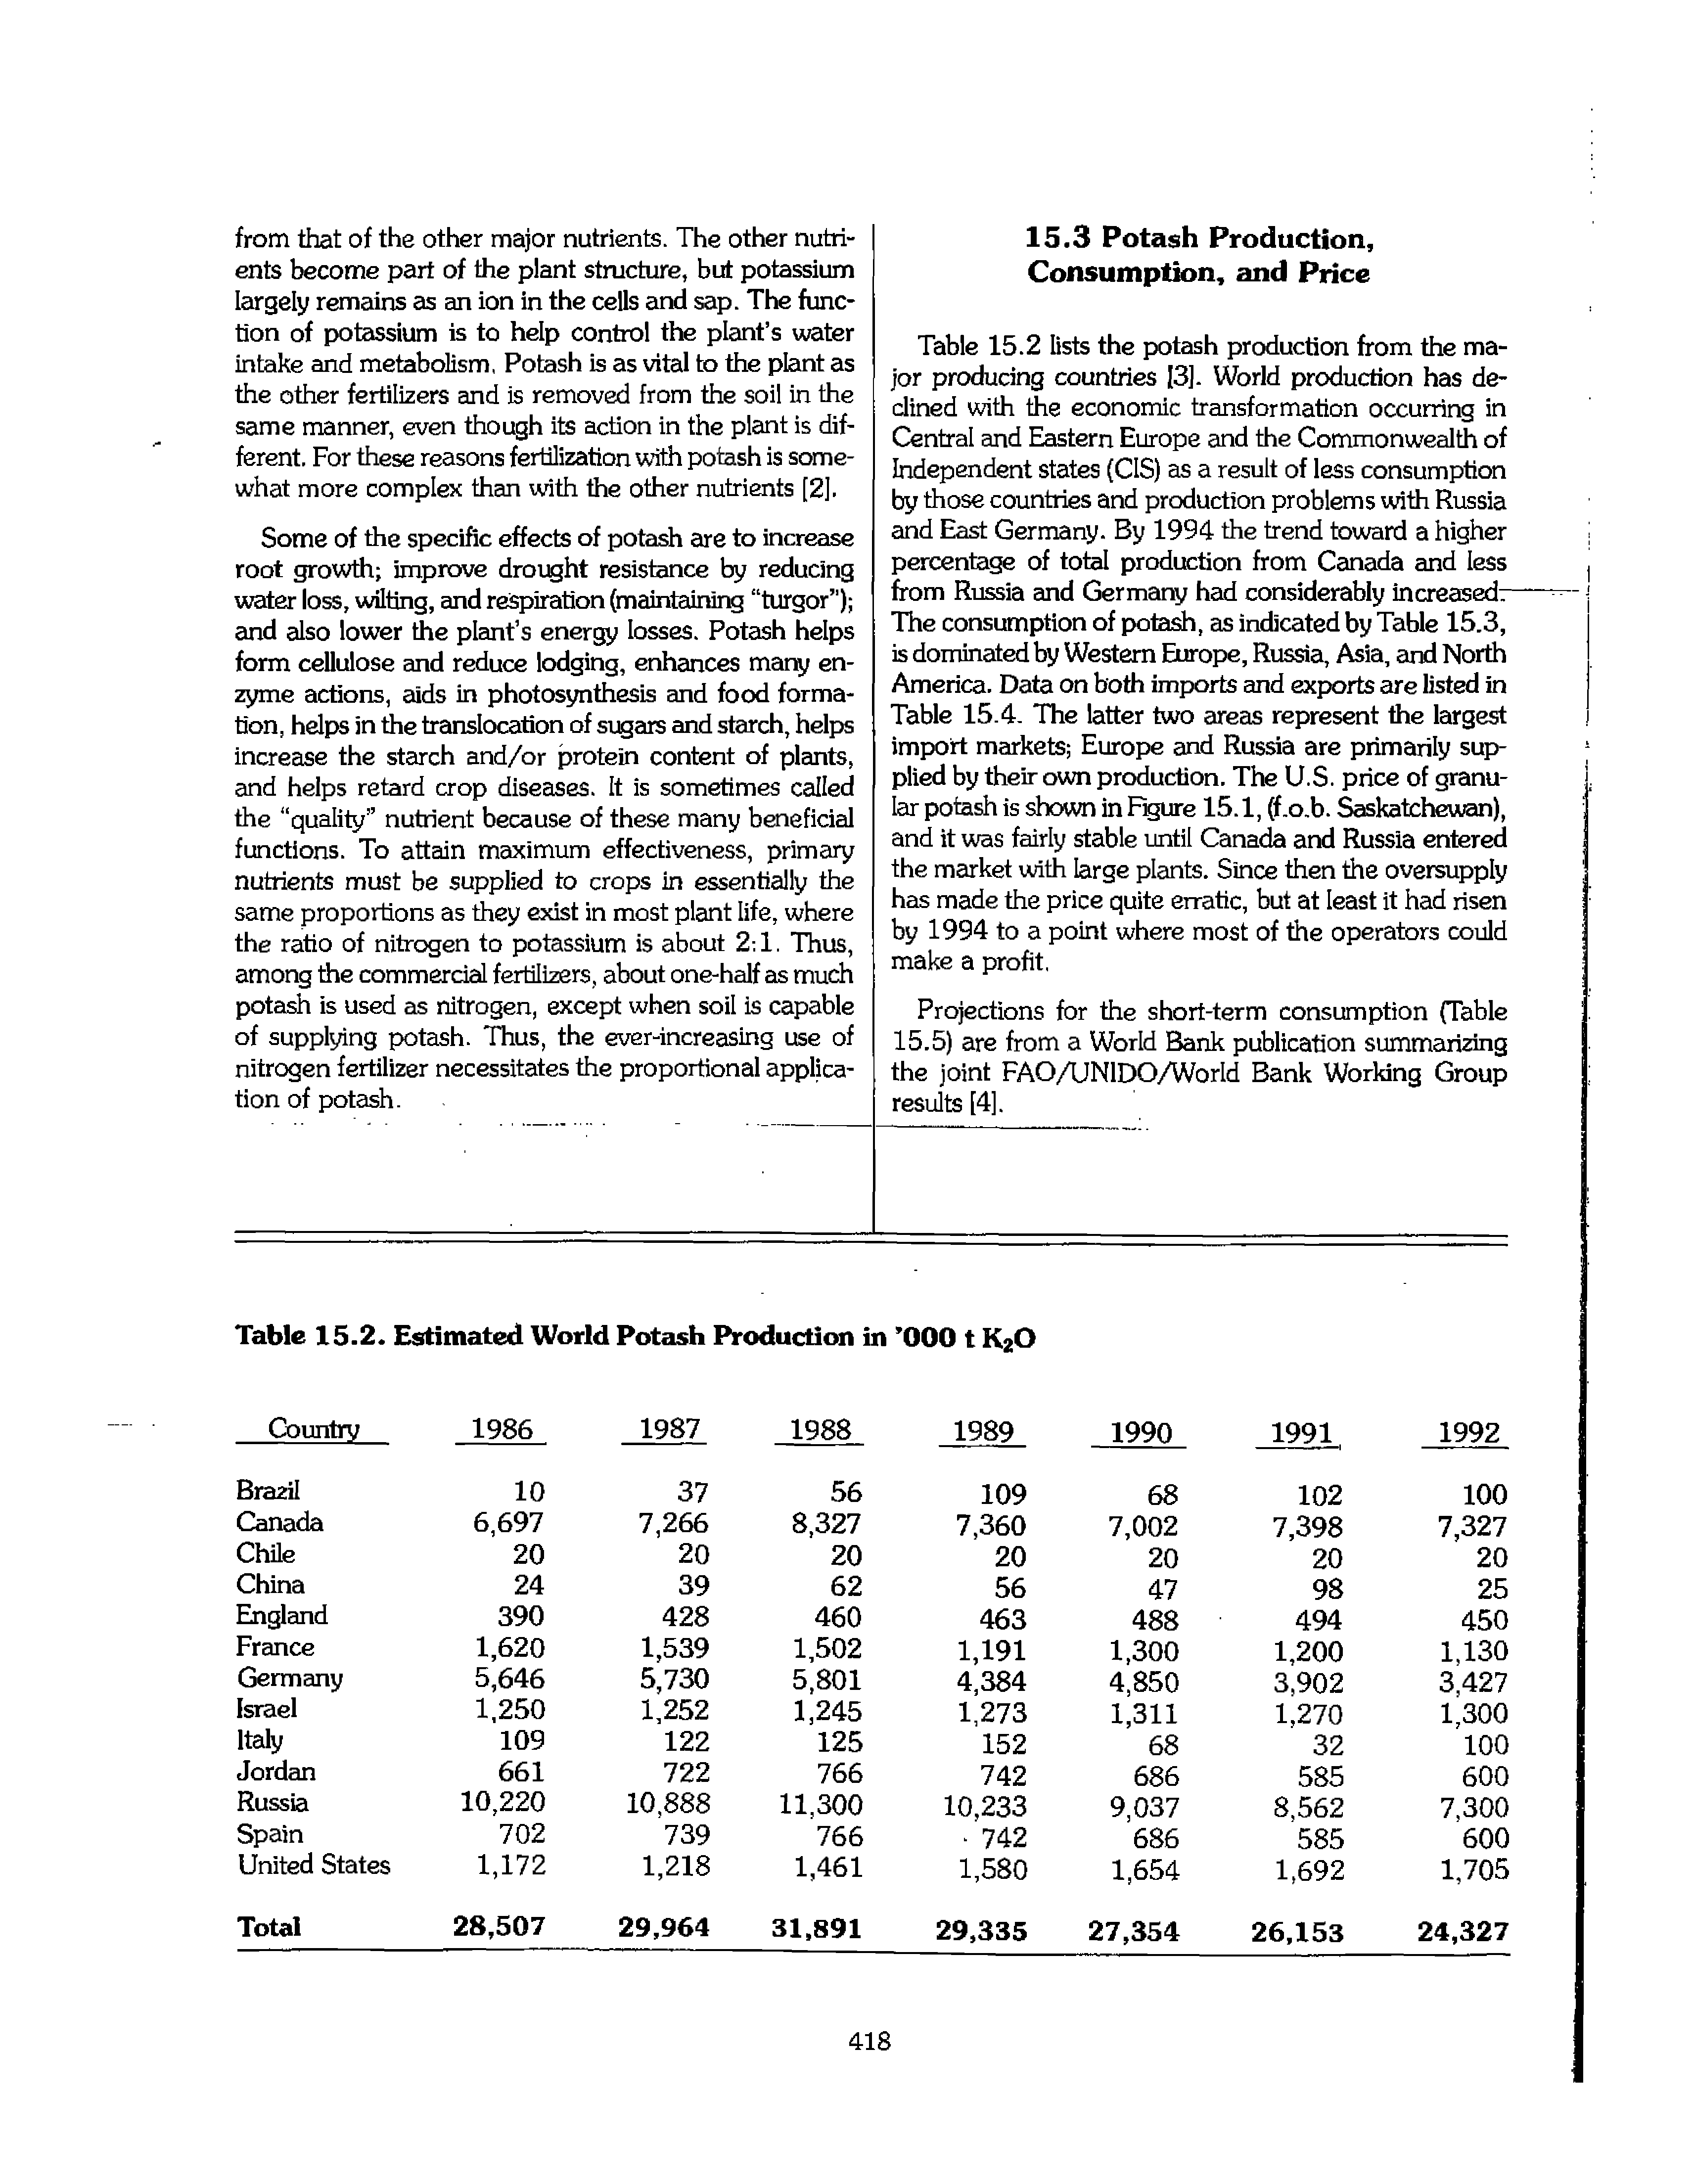 Table 15.2 lists the potash production from the major producing countries 13]. World production has declined with the economic transformation occurring in Central and Eastern Europe and the Commonwealth of Independent states (CIS) as a result of less consumption by those countries and production problems with Russia and East Germany. By 1994 the trend toward a higher percentage of total production from Canada and less from Russia and Germany had considerably increased— The consumption of potcdi, as indicated by Table 15.3, is dominated by Western Europe, Russia, Asia, and North America. Data on both imports and exports are listed in Table 15.4. The latter two areas represent the largest import markets Europe and Rus are primarily sip-plied by their own production. The U.S. price of granular potash is shown in F ure 15.1, (f.o.b. Saskatchewan), and it was fairly stable until Canada and Russia entered the market with large plants. Since then the oversupply has made the price quite erratic, but at least it had risen by 1994 to a point where most of the operators could make a profit.